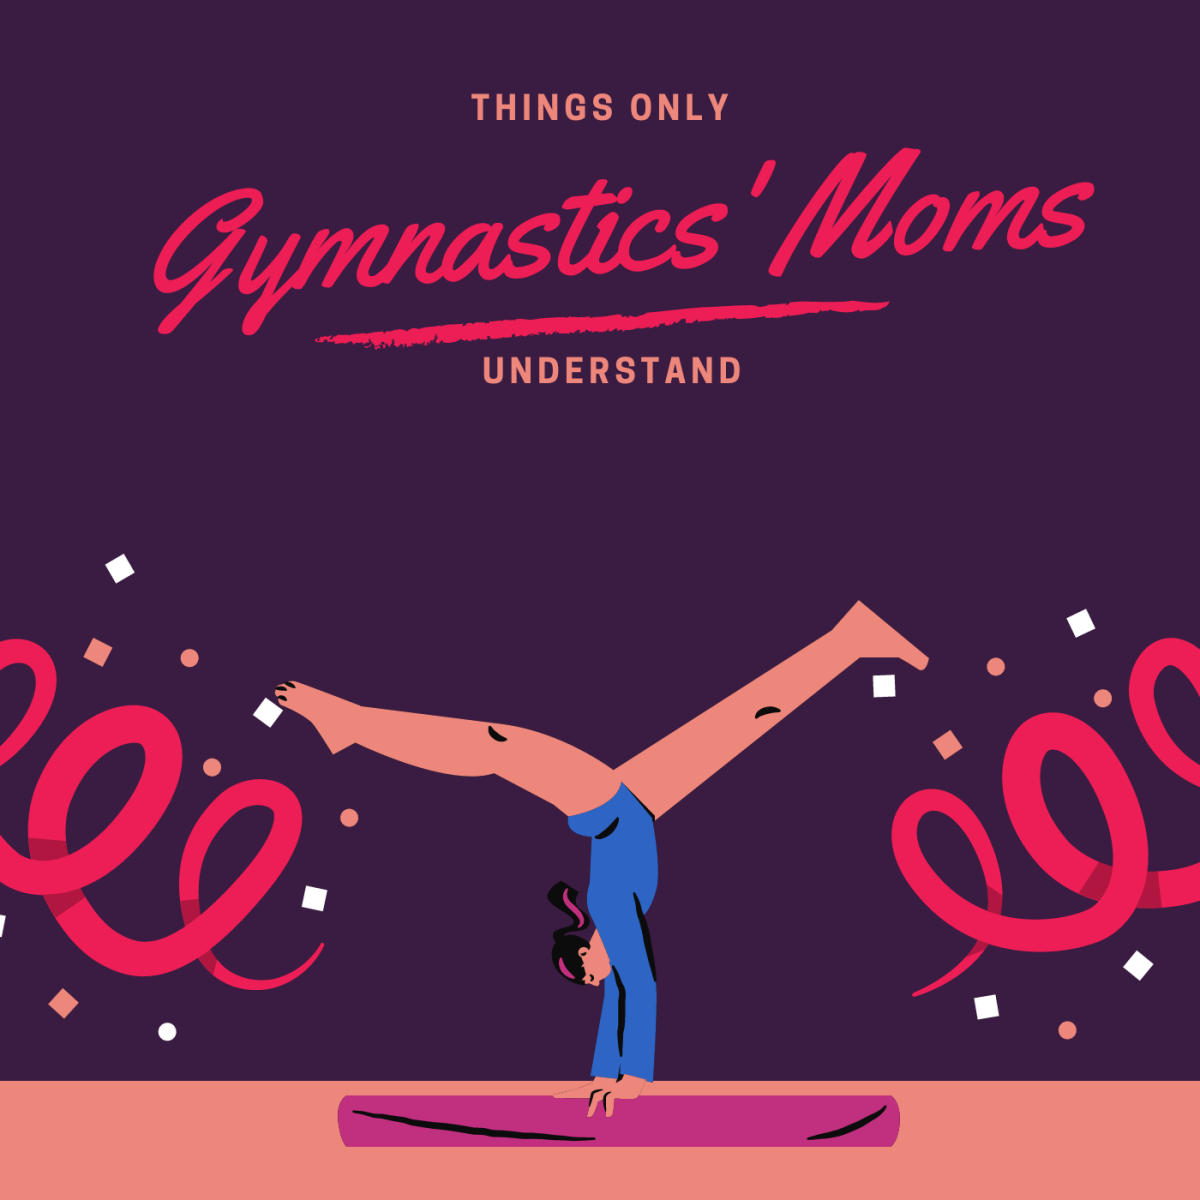 10 Things Only Gymnasts' Moms Understand